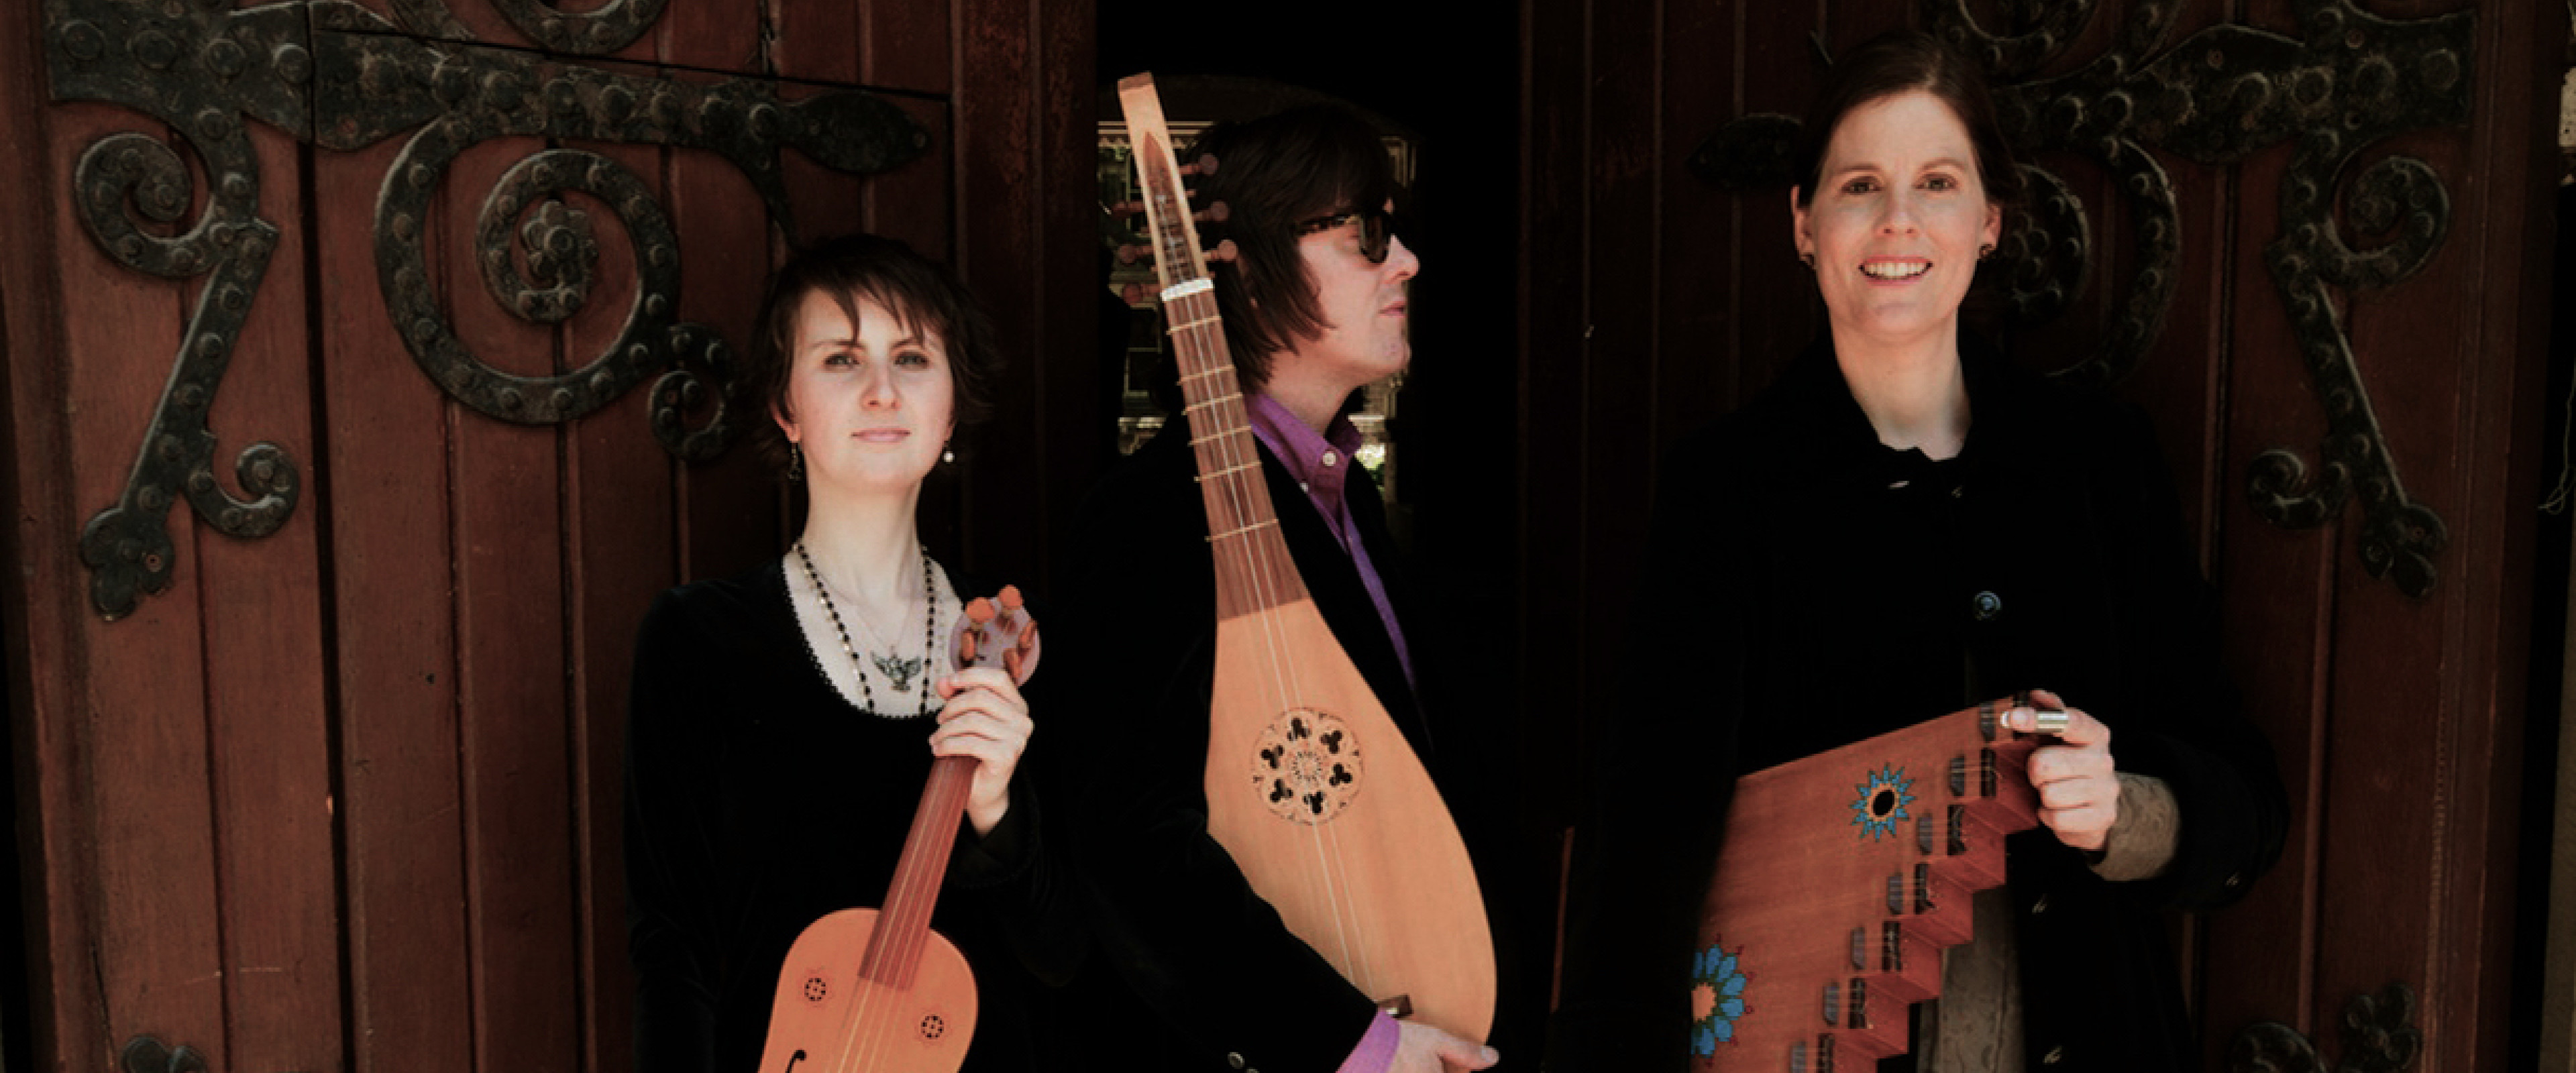 Members of the Pneuma Ensemble stand holding their instruments: a vielle, lute, and psaltery.